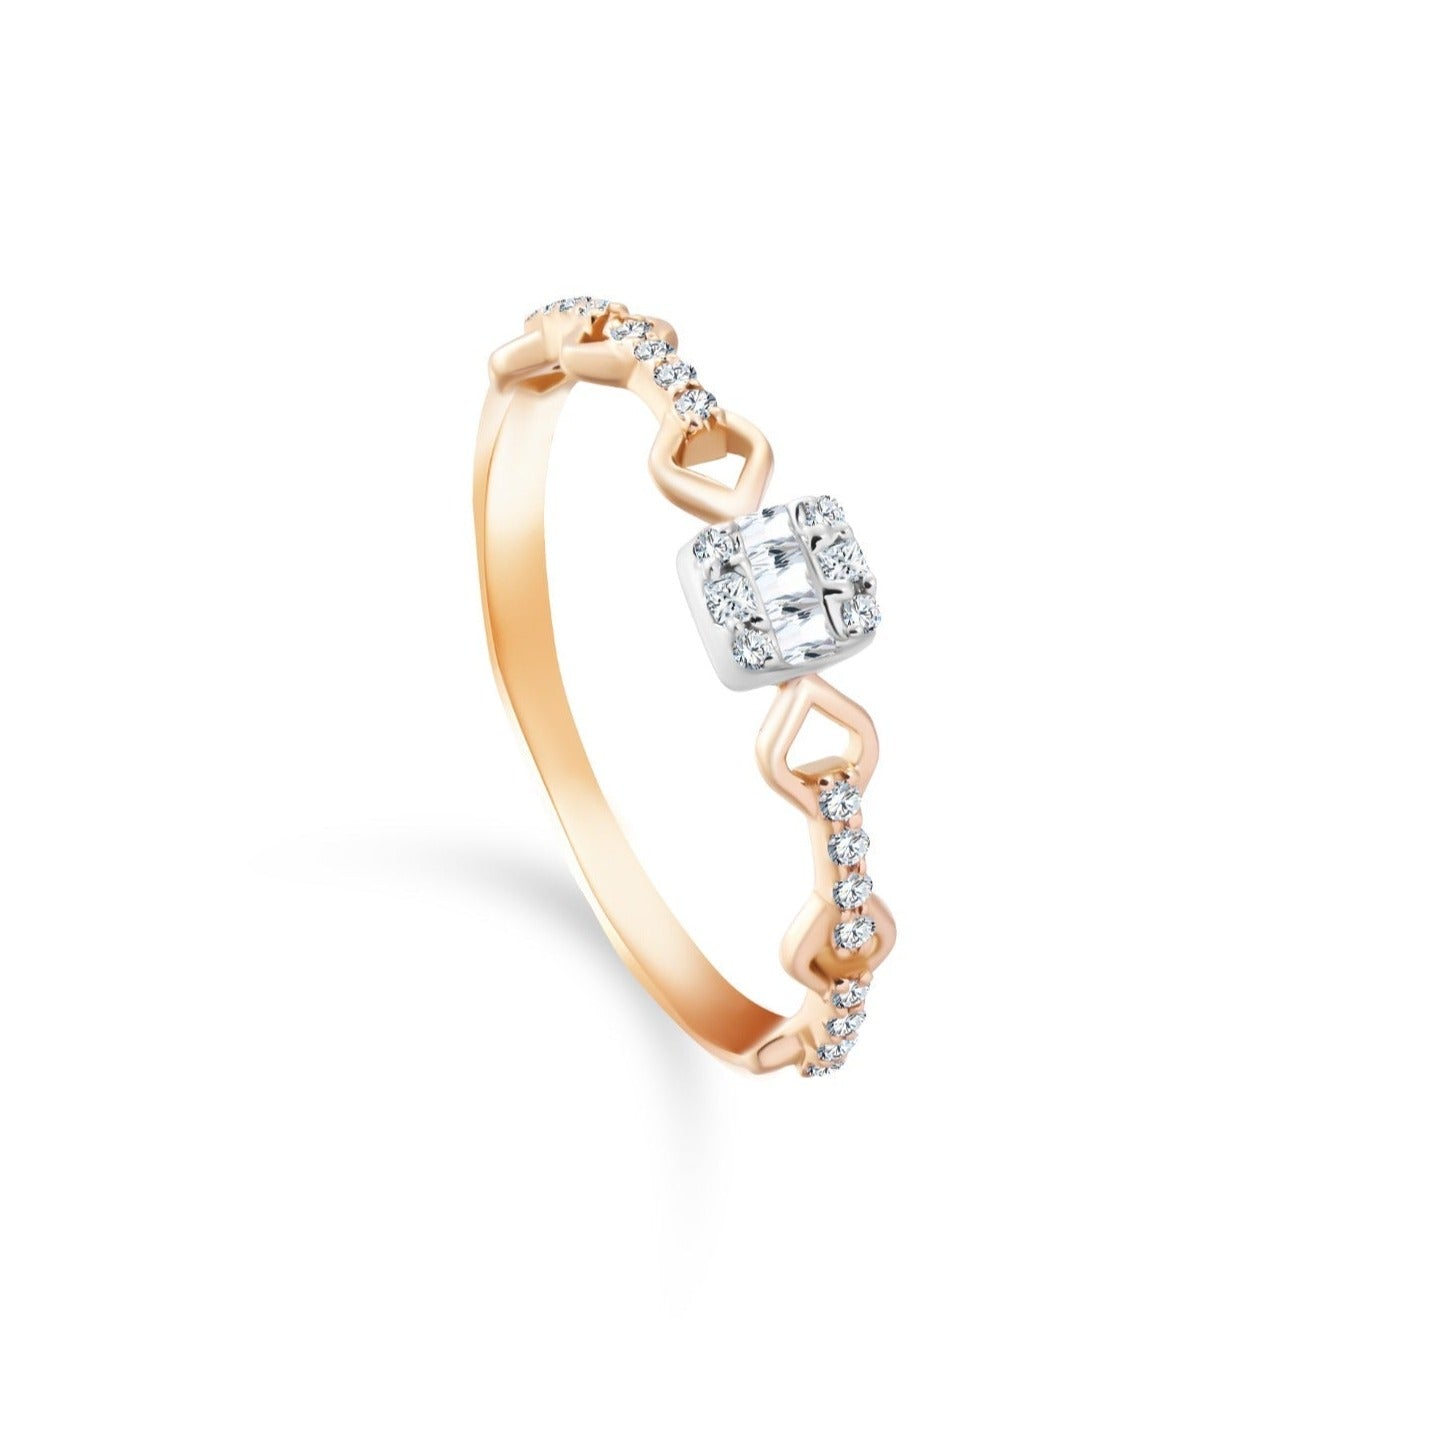 Half diamonded ring with 20 round brilliant, 3 baguette and 2 pear diamonds  in 18K ROSE Gold - YZ-0343-R/J